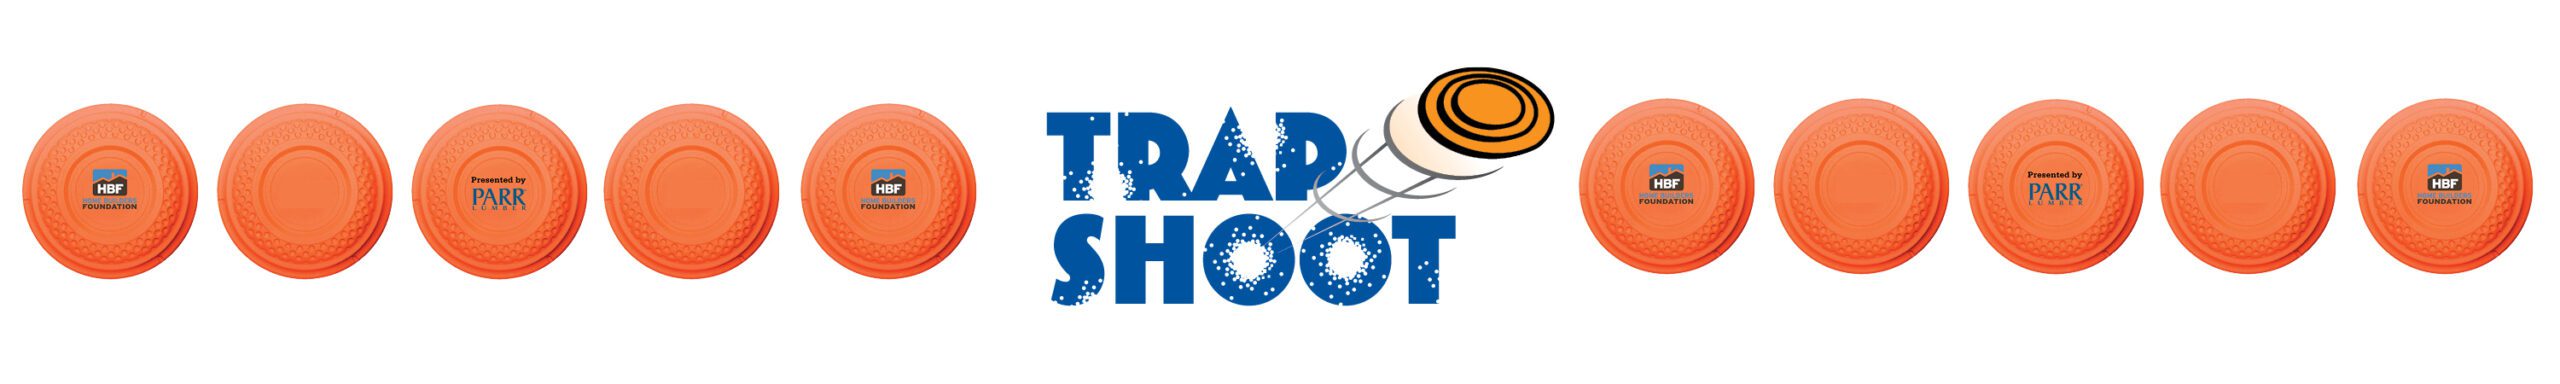 HBF Trap Shoot presented by Parr Lumber